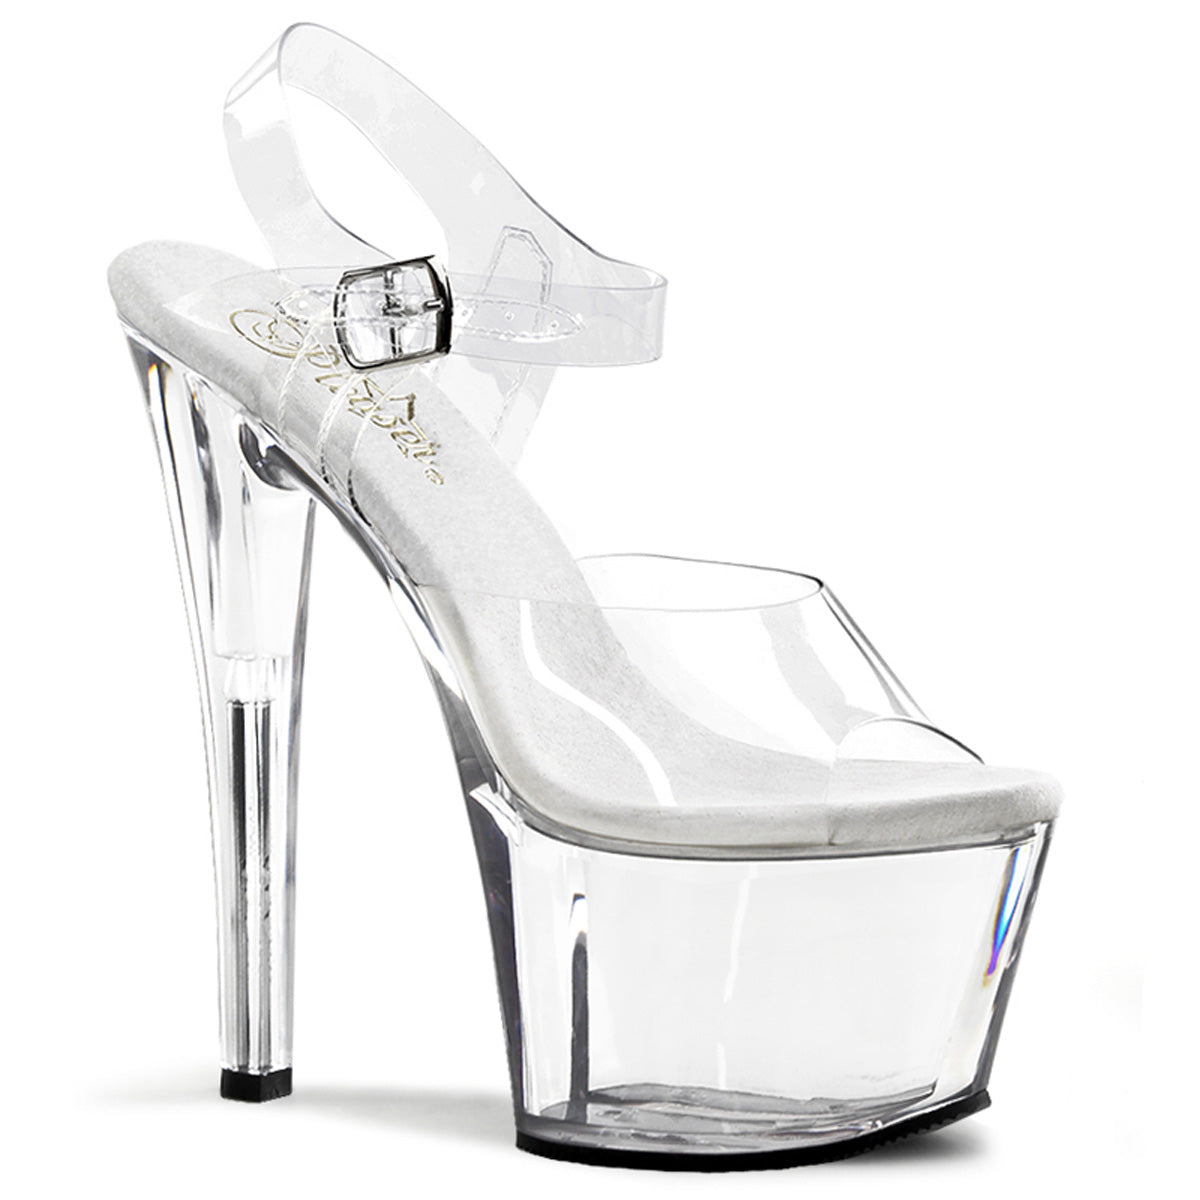 SKY-308 Clear Sandals